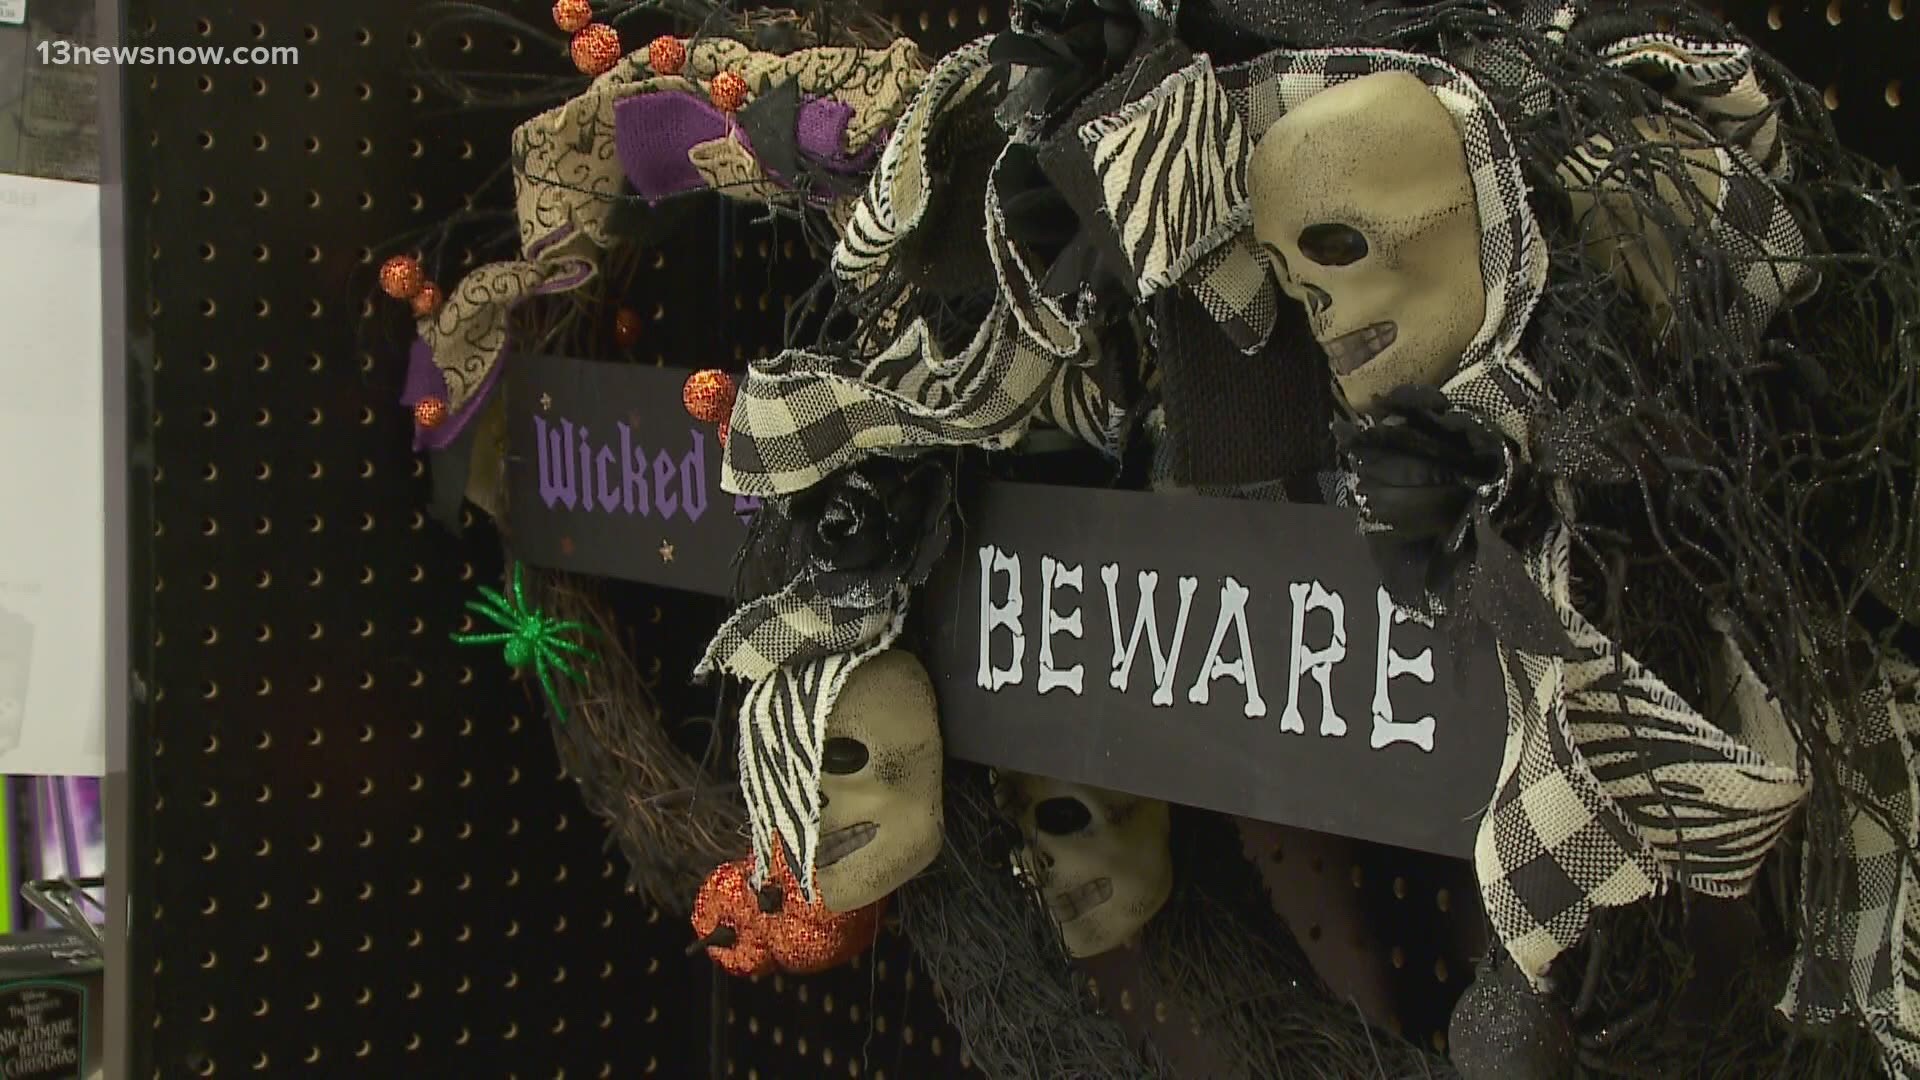 With Halloween knocking at our door, the CDC has issued new guidance for the holidays.